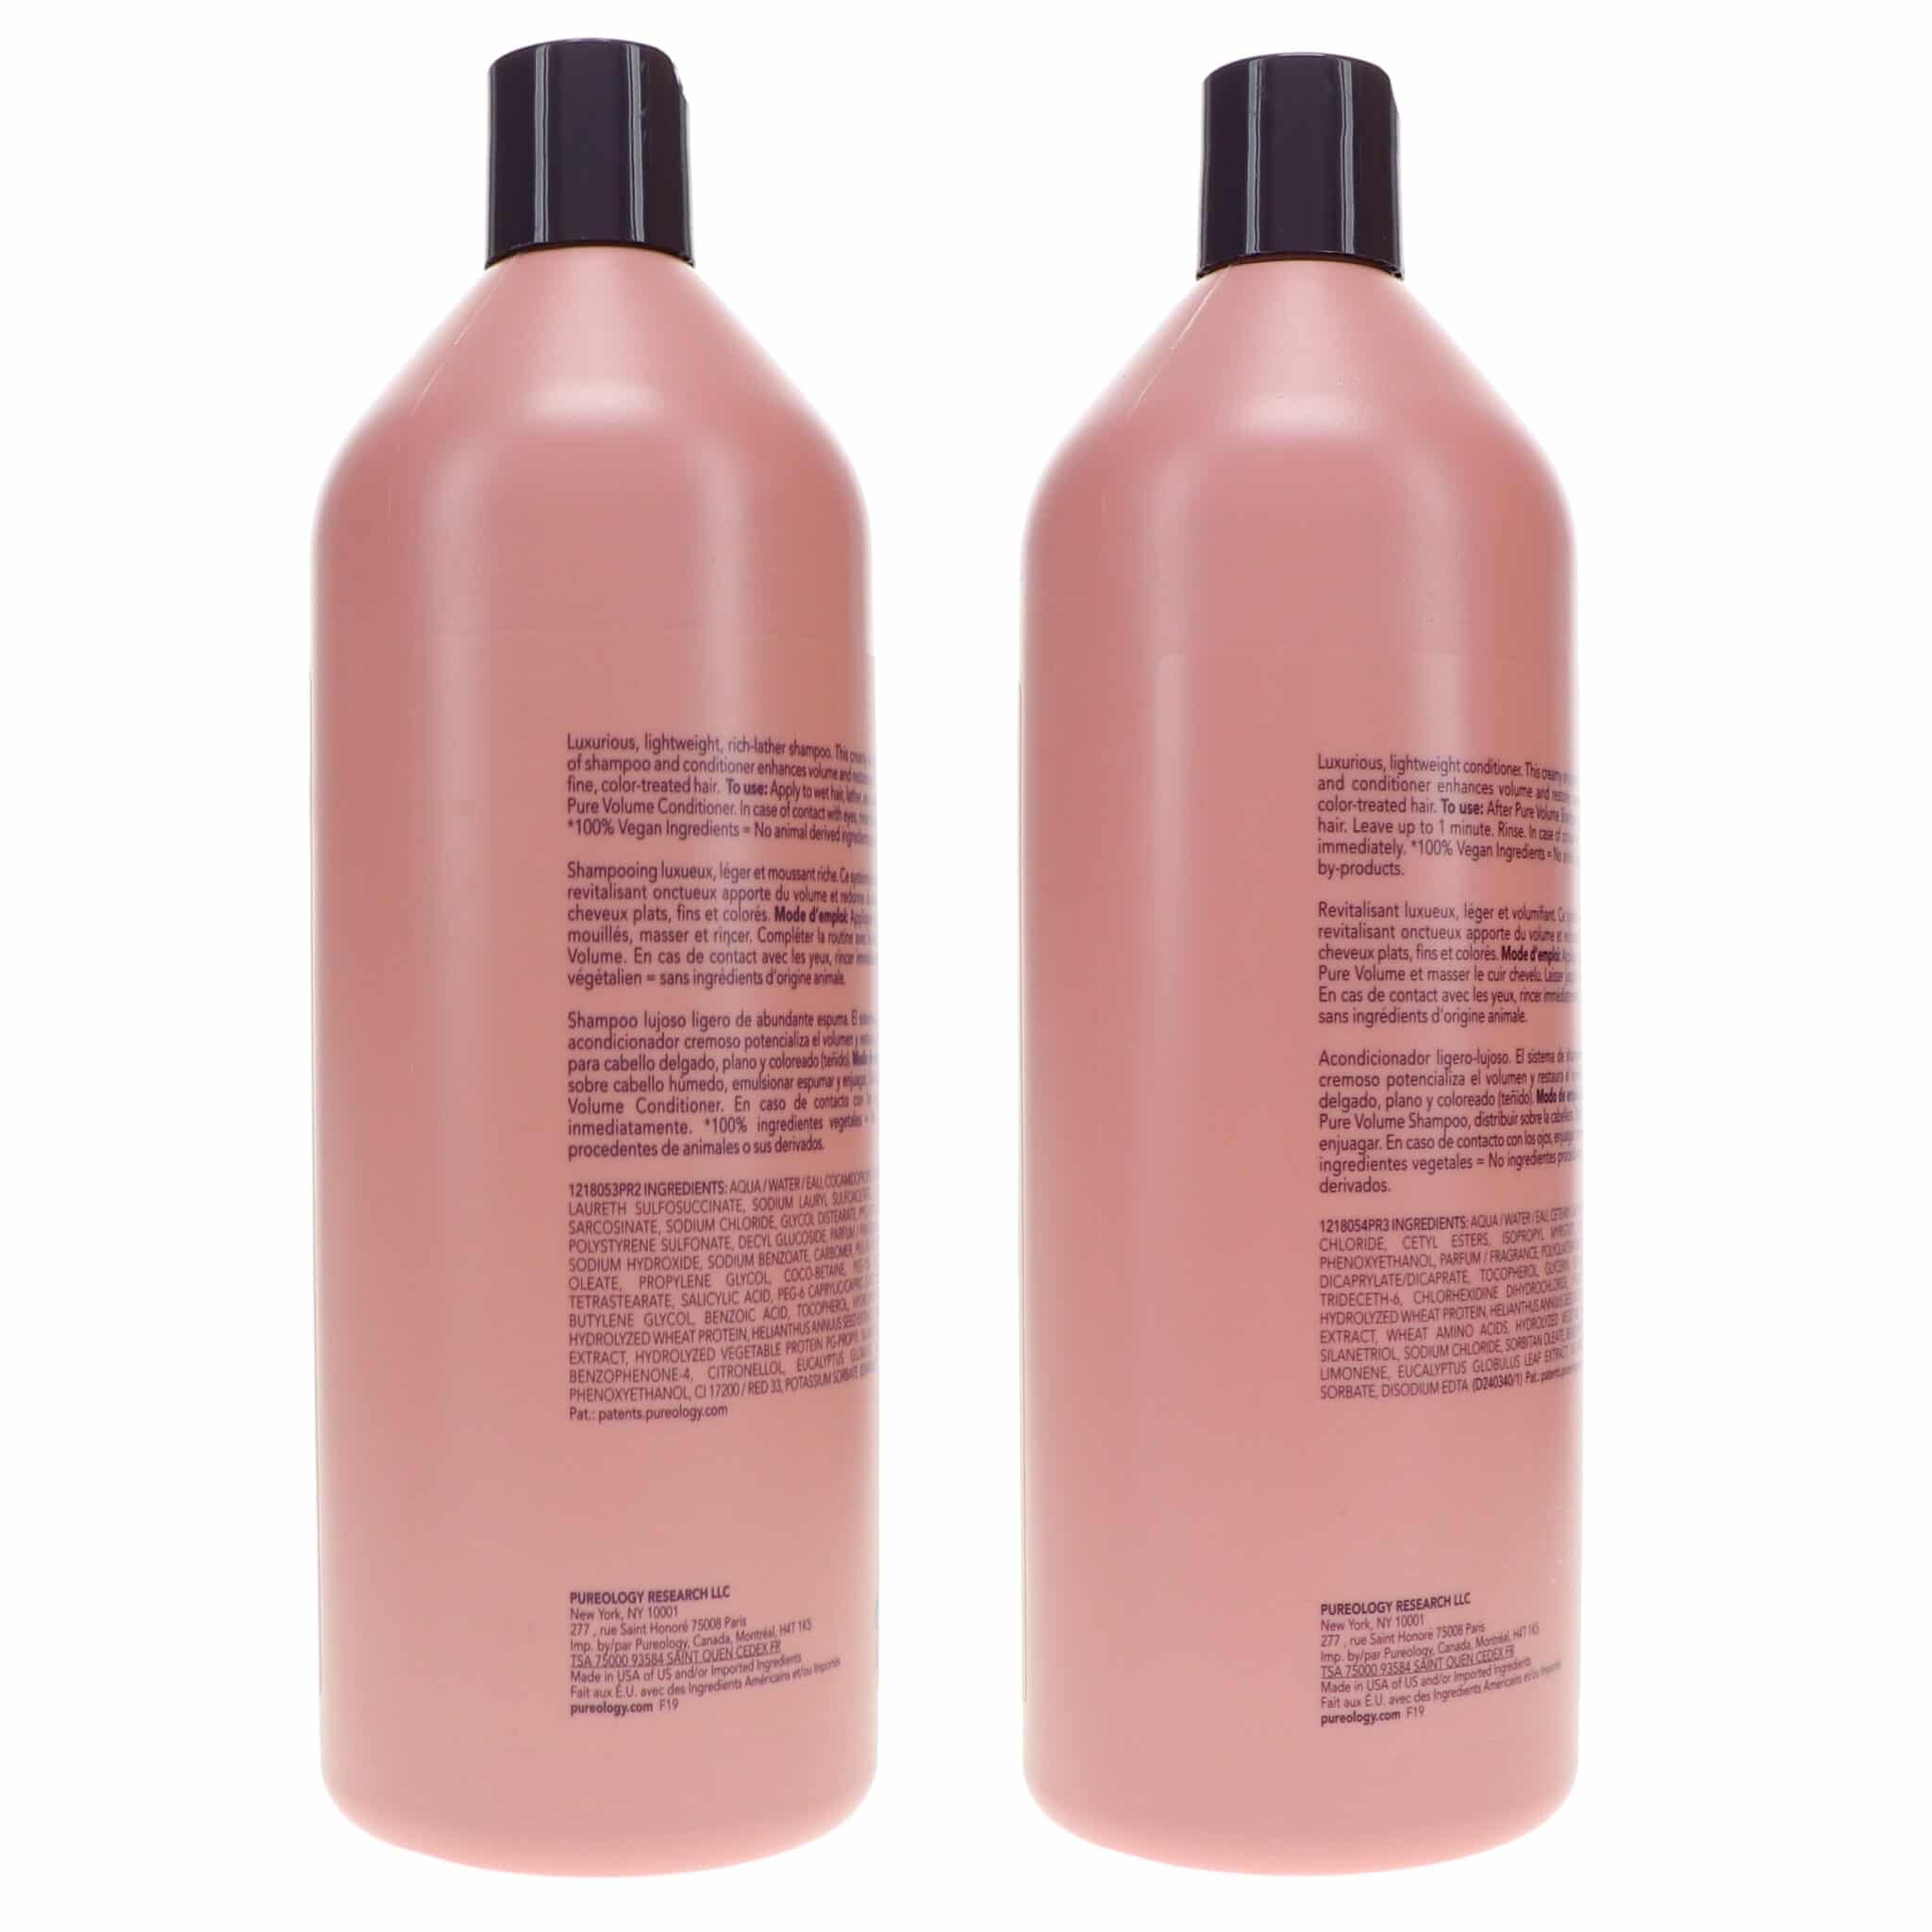 Pureology Pure Volume Shampoo 33.8 oz Pure Volume Conditioner 33.8 Combo Pack | LaLa Daisy